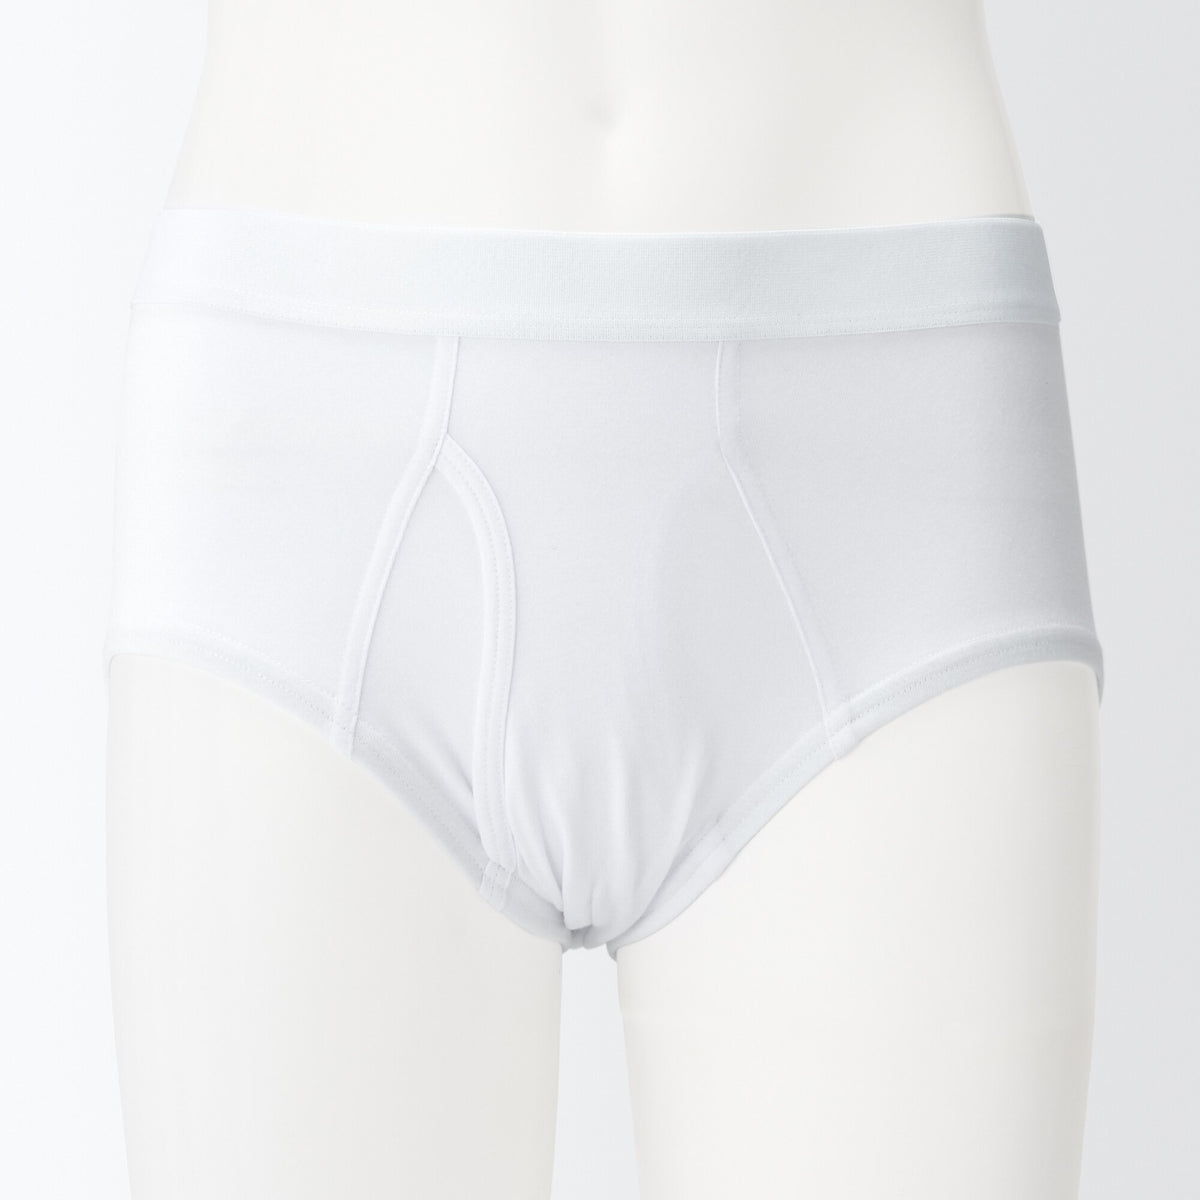 High Quality Product] Muji men's underwear, breathable and resistant, shop  is committed to quality Sp